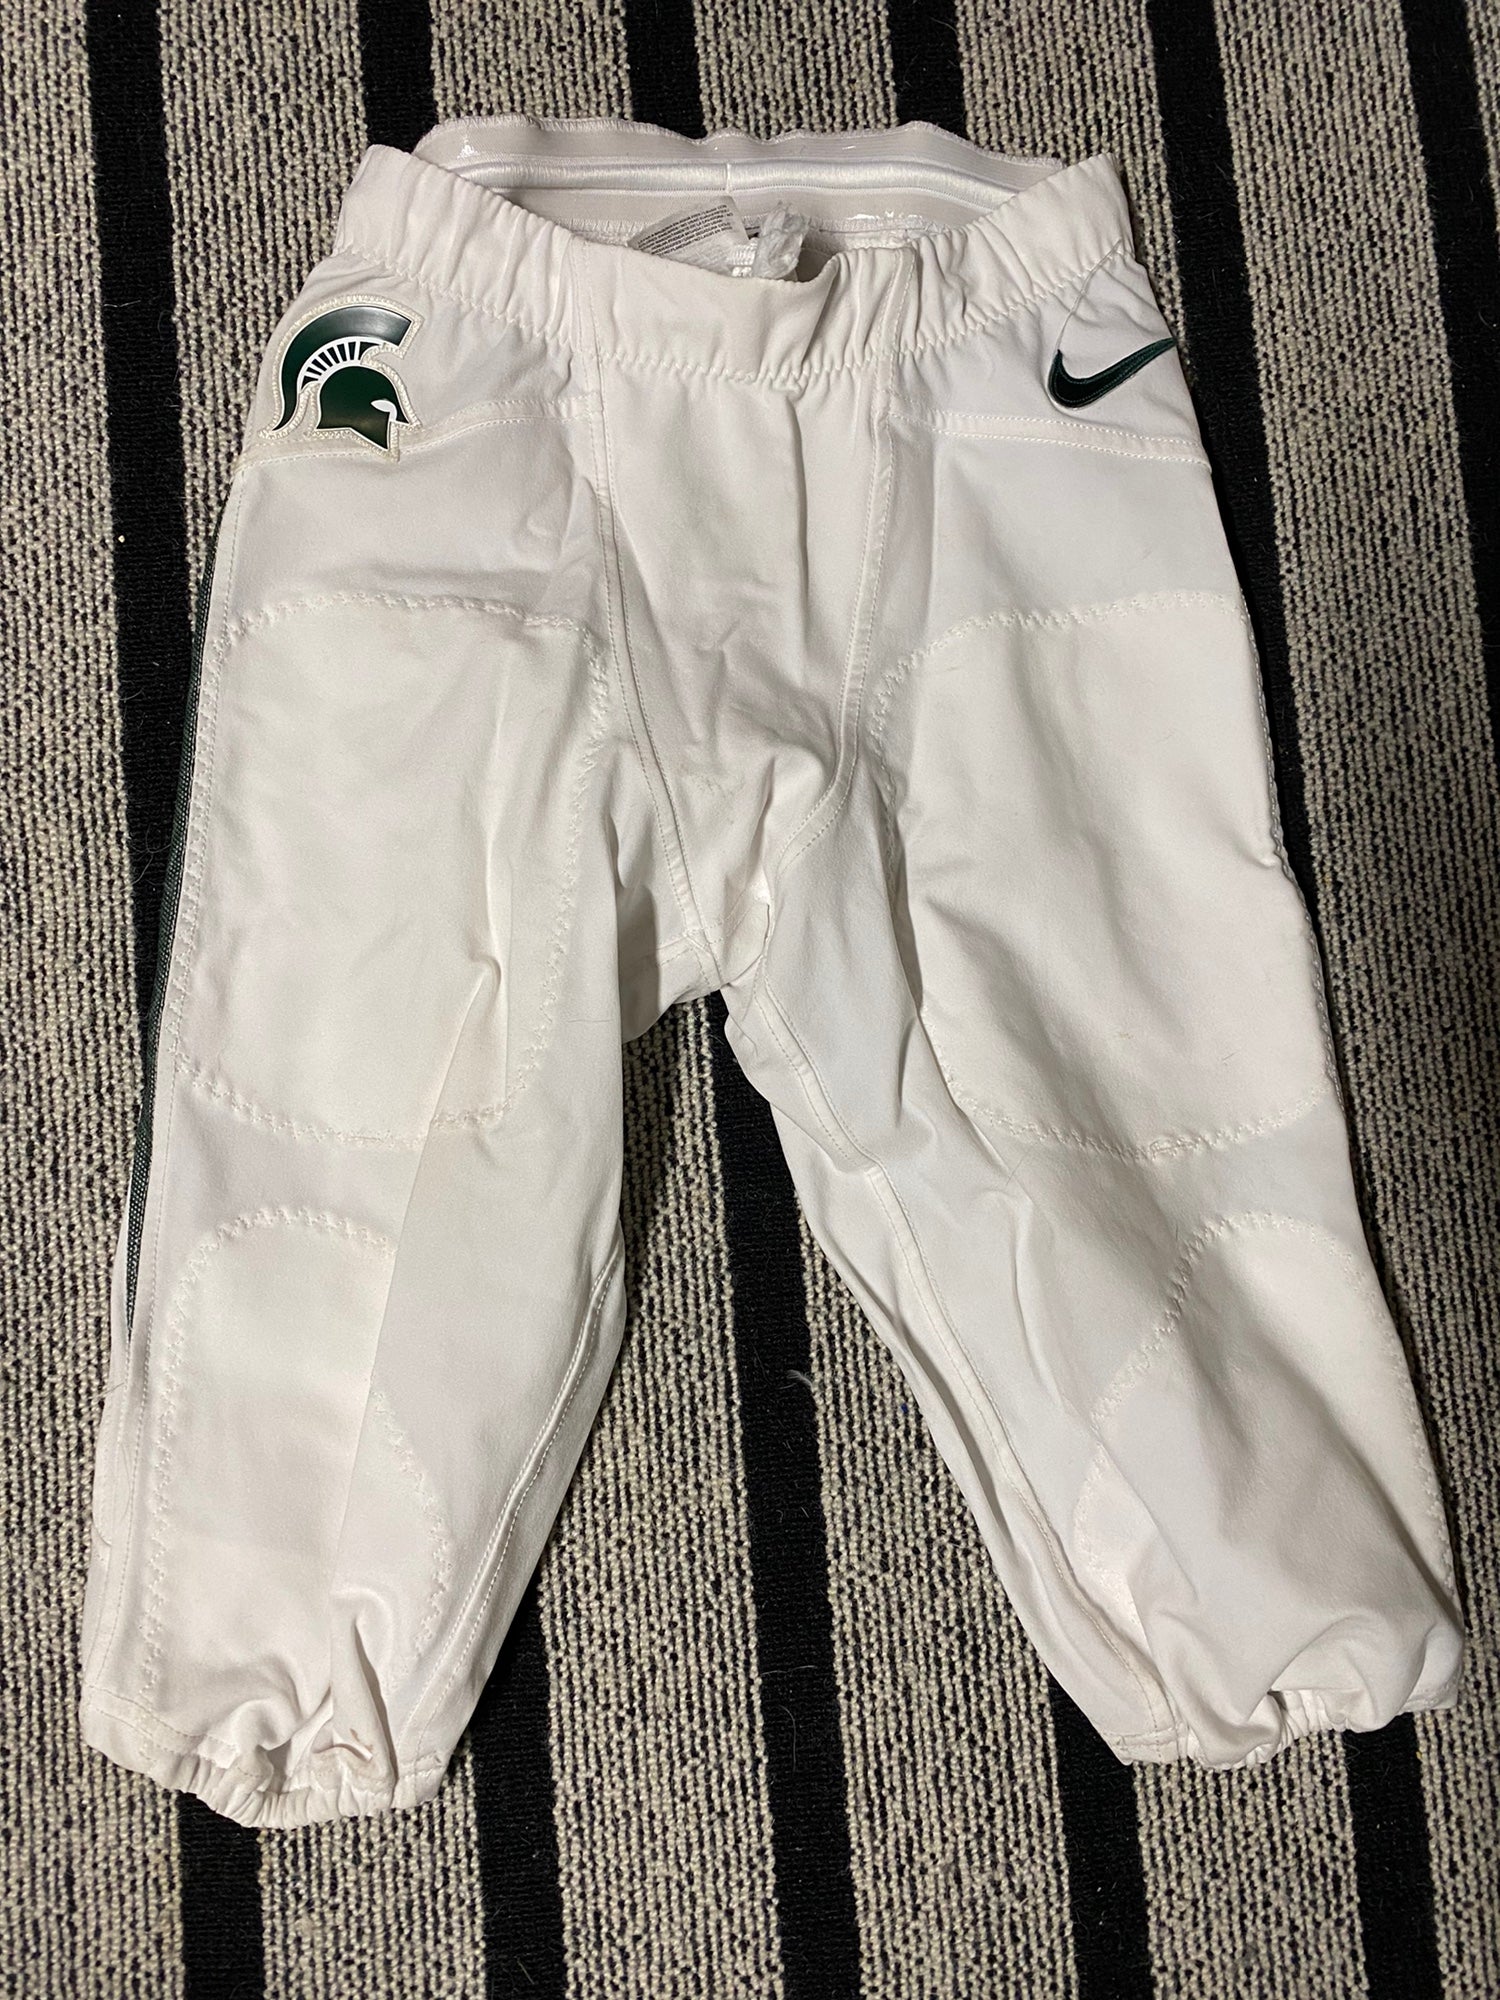 Details about   MEN'S WHITE USED Football PANTS ADULT XL 